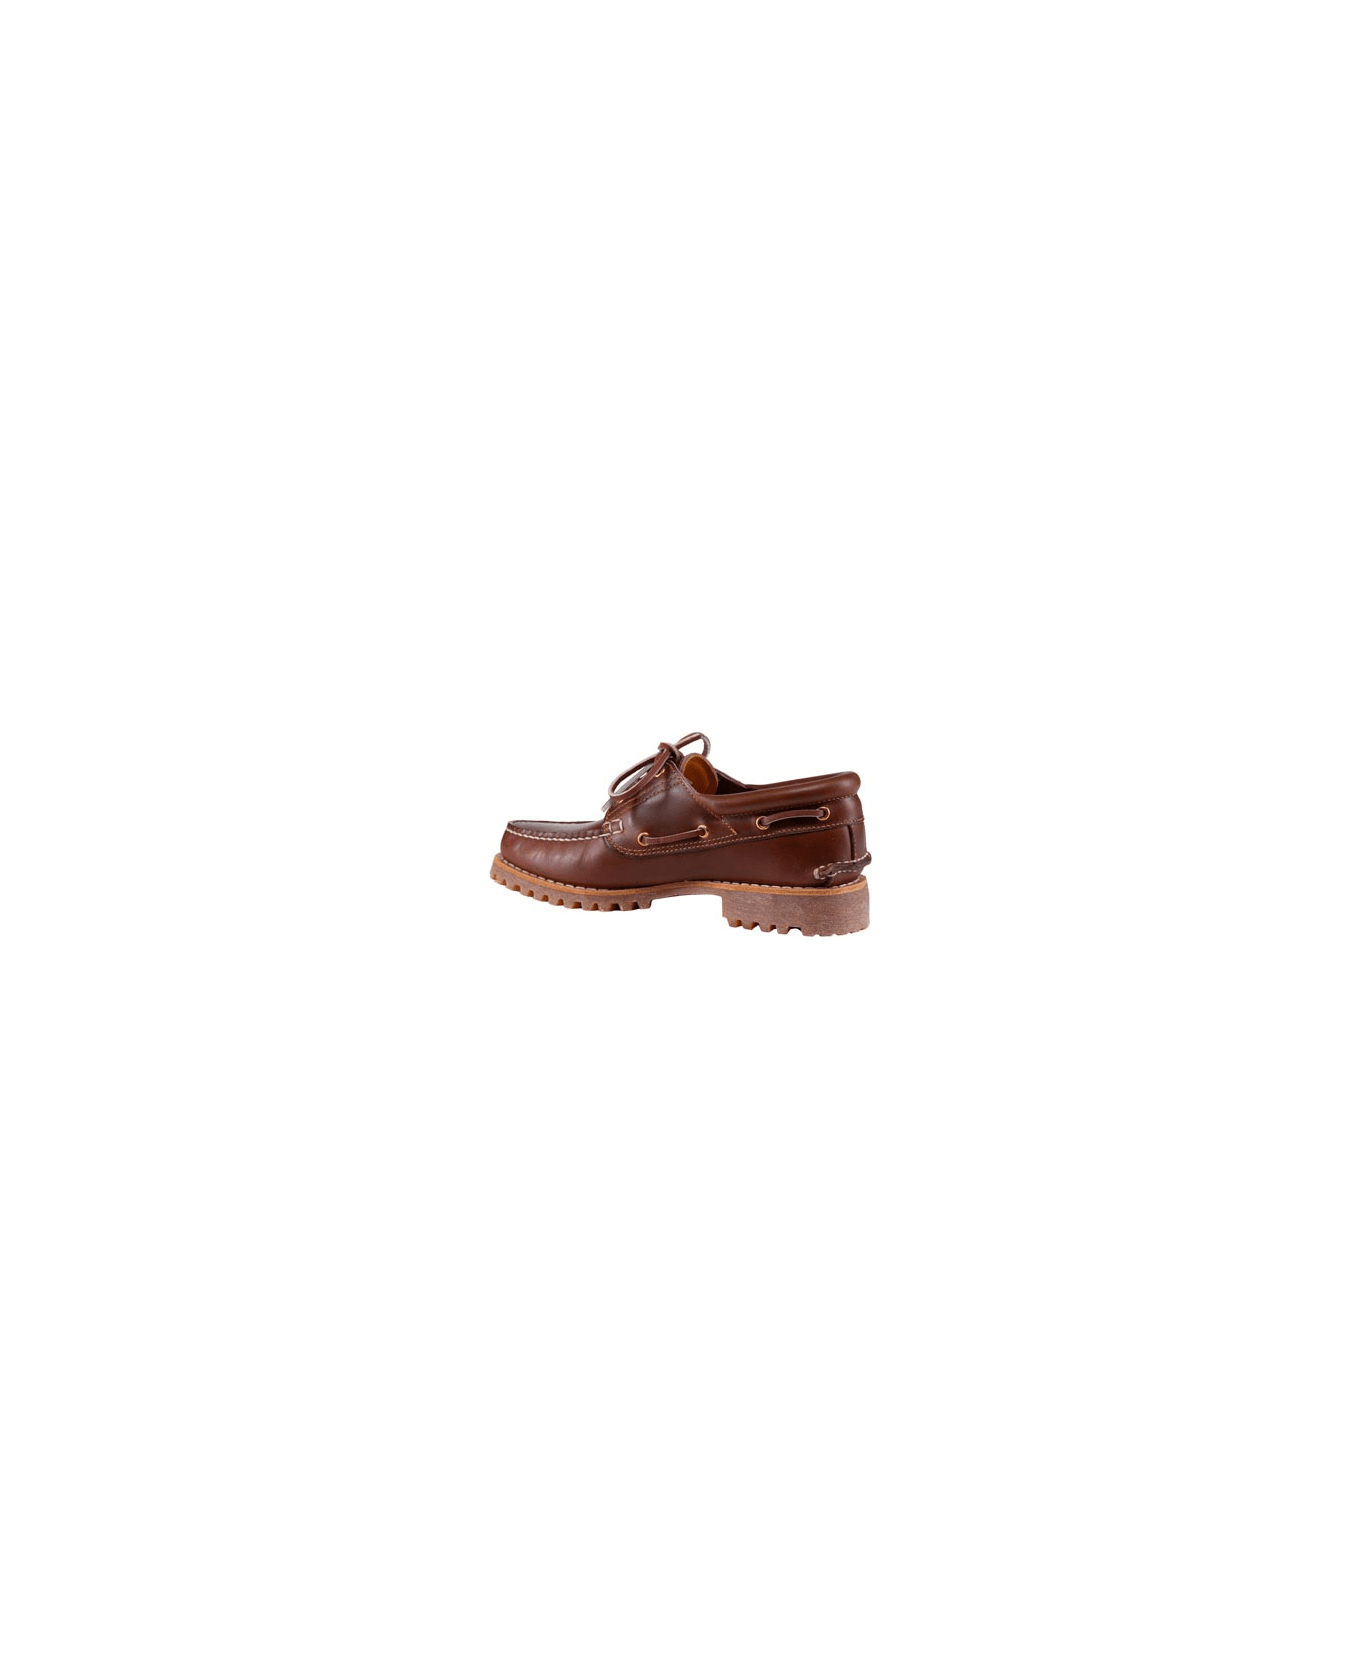 Timberland Loafer Authentics Shoes